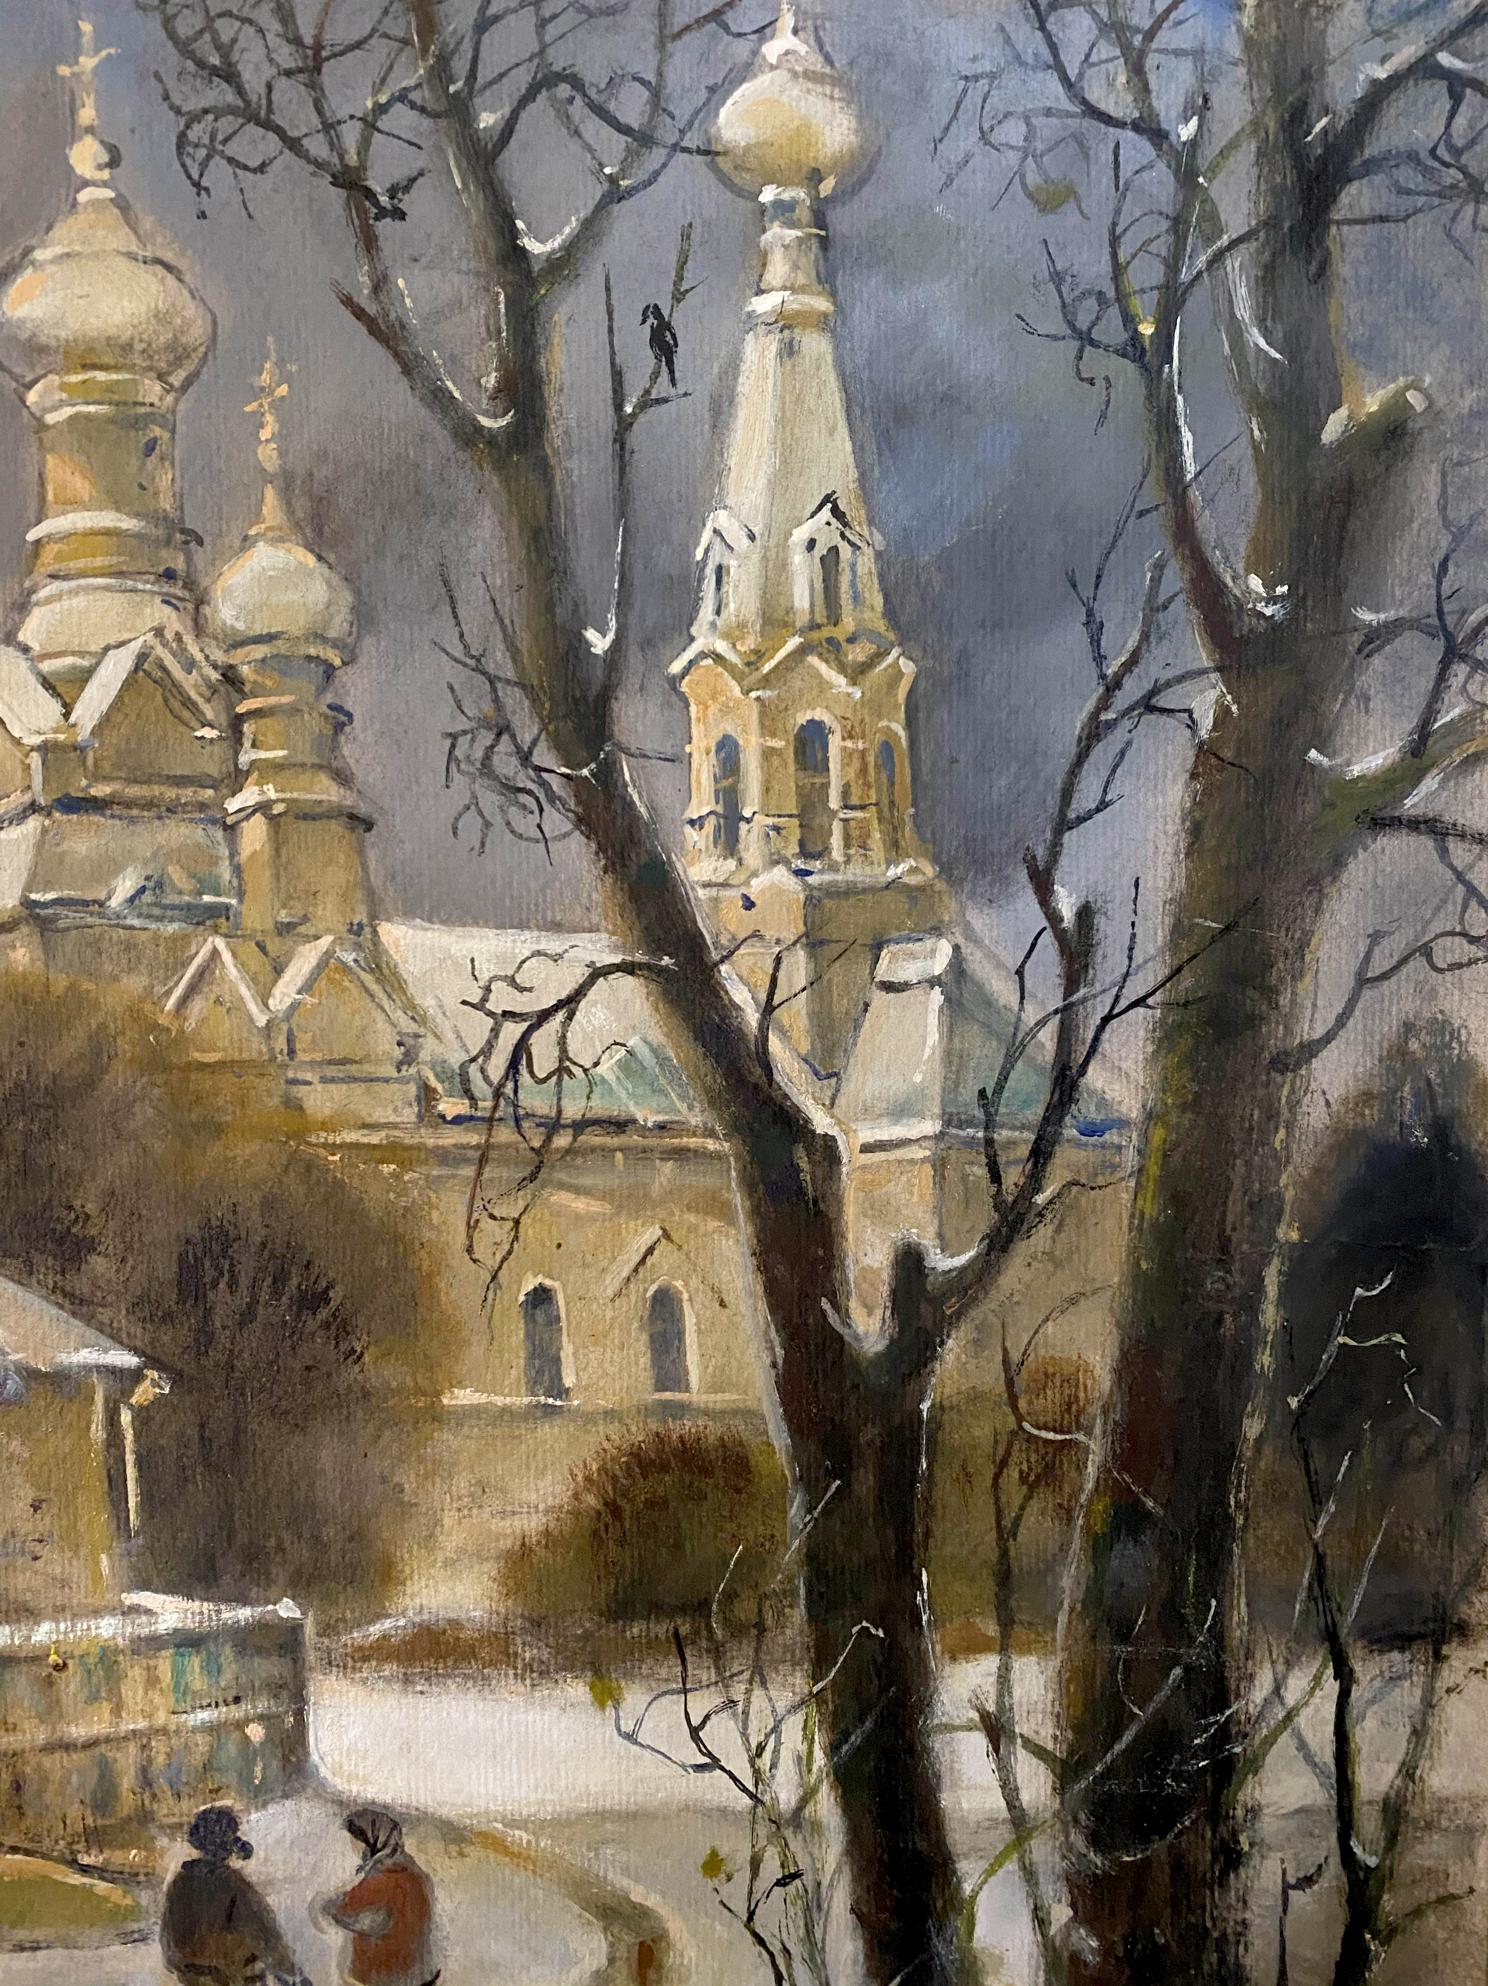 Experience the chill of "In Winter 2013" through Oleg Arkad'yevich Litvinov's oil painting